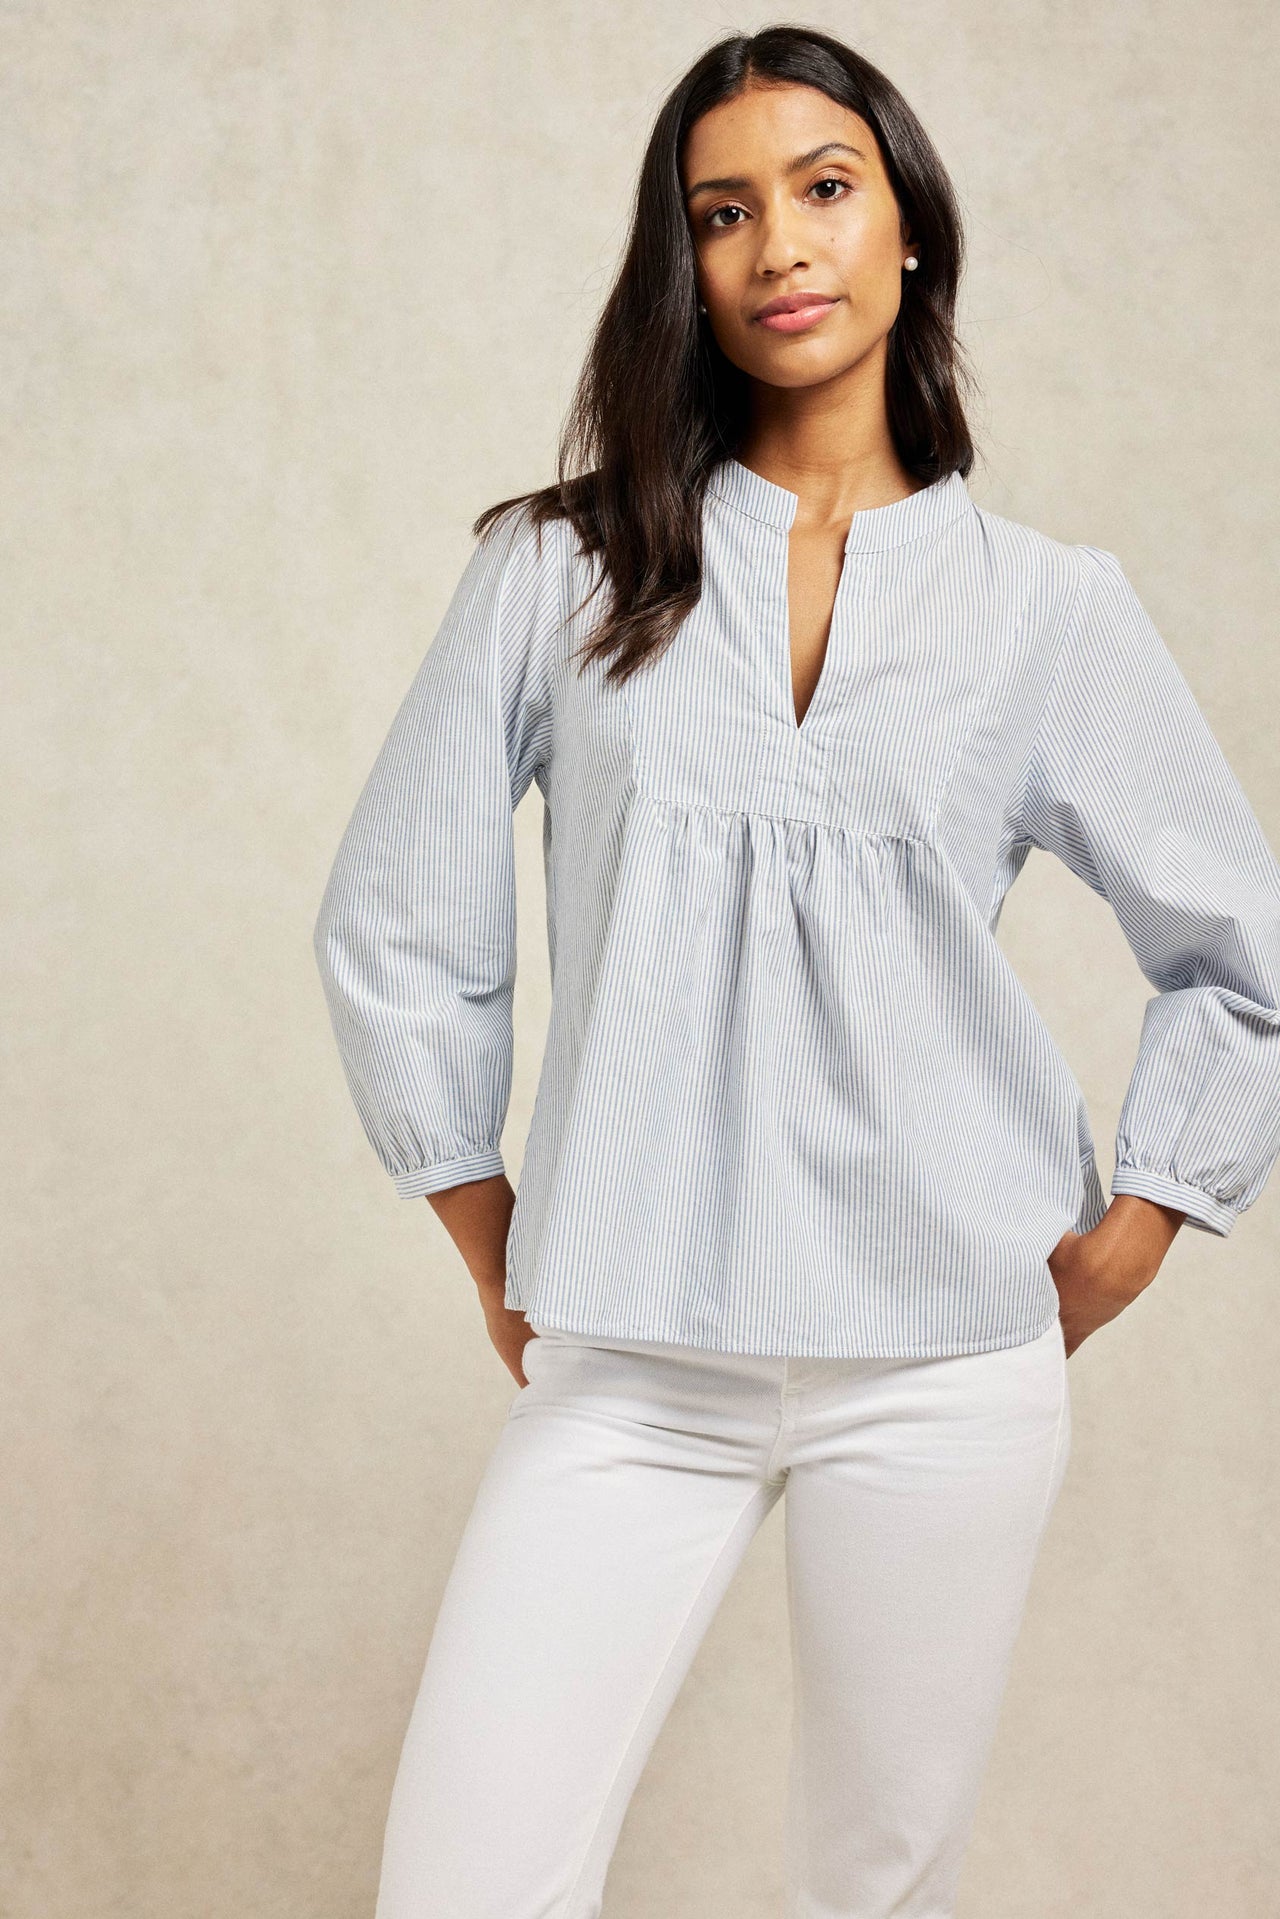 Flattering Gathered Woman’s Top